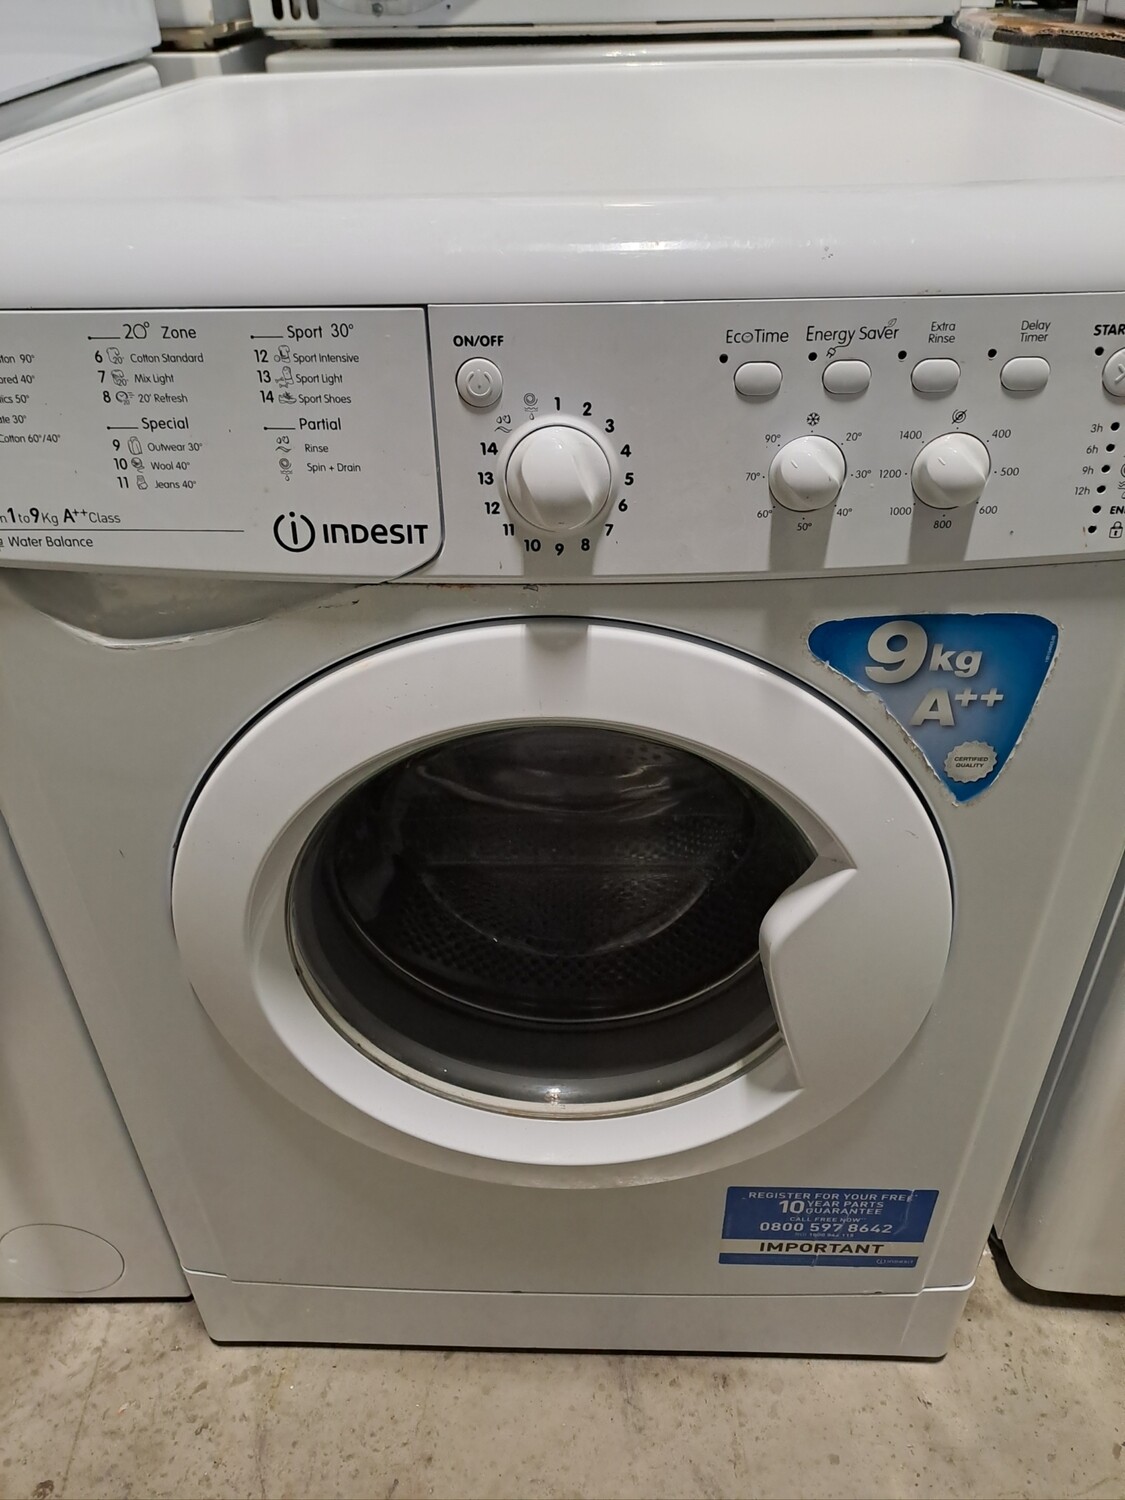 Indesit IWC91482 9kg Load 1400 Spin Washing Machine - White - Refurbished - 6 Month Guarantee. This item is located in our Whitby Road Shop 